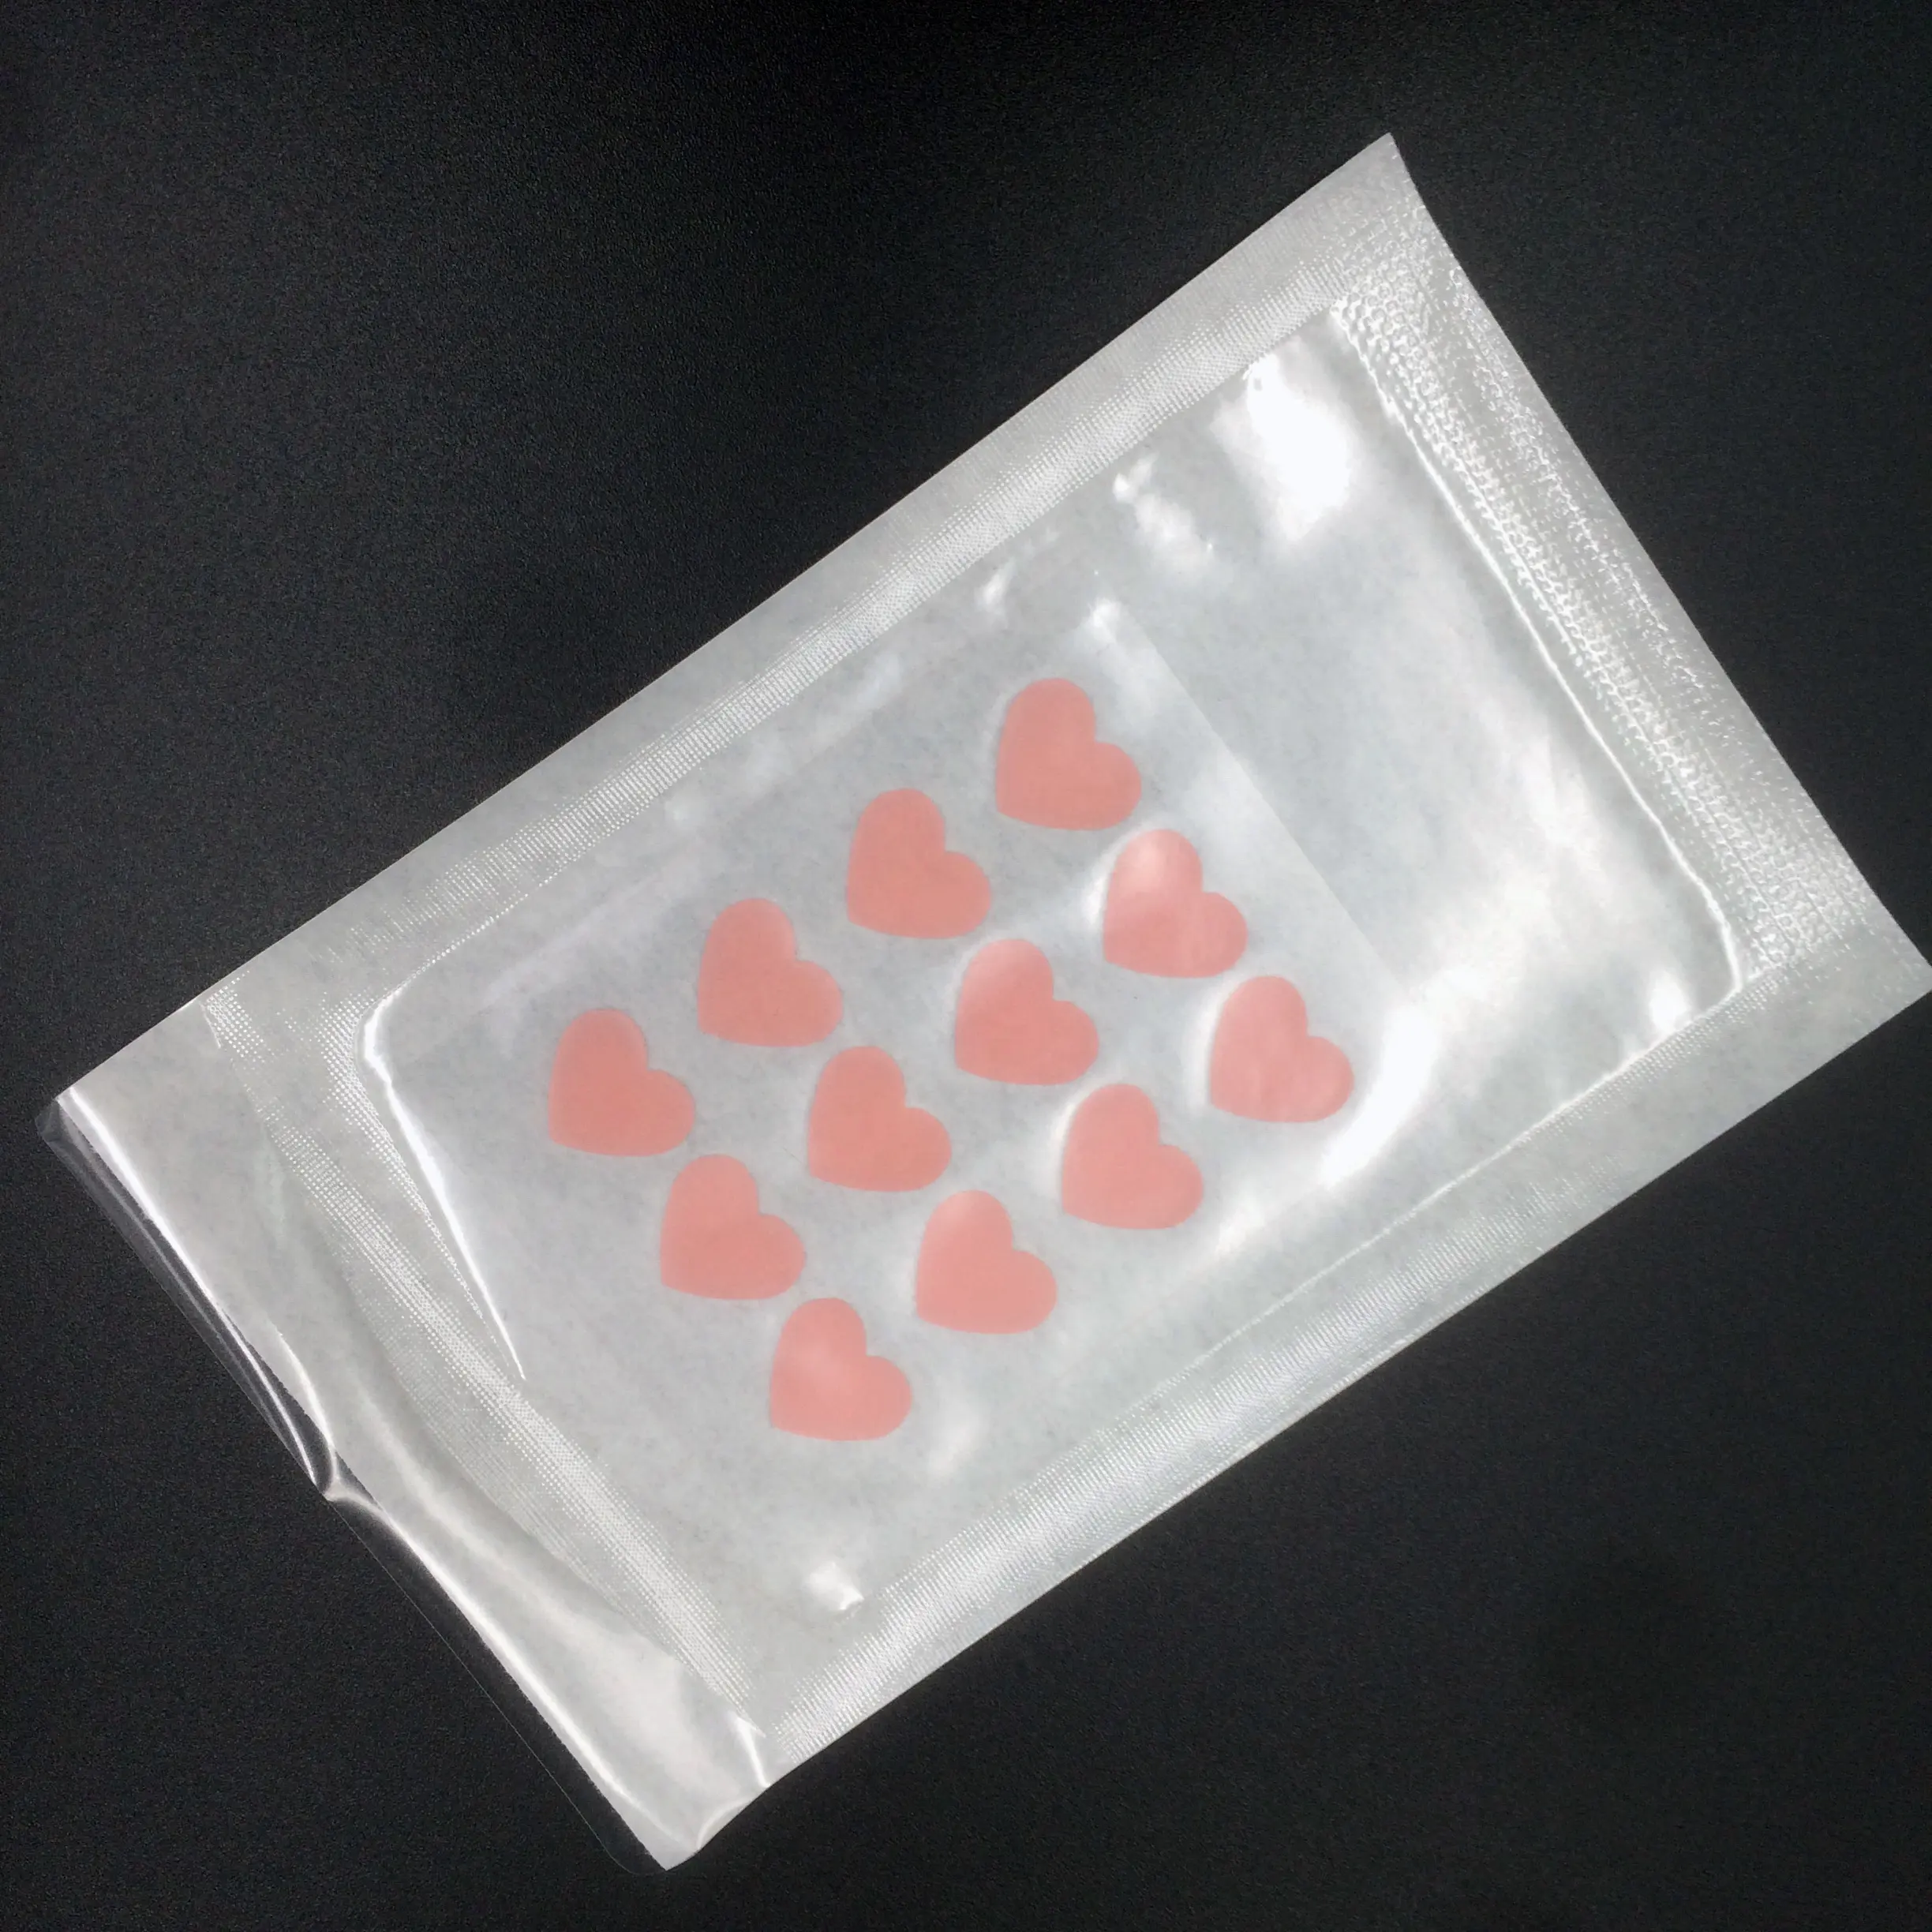 HENSO Pink Heart Shape Hydrocolloid Acne Patch